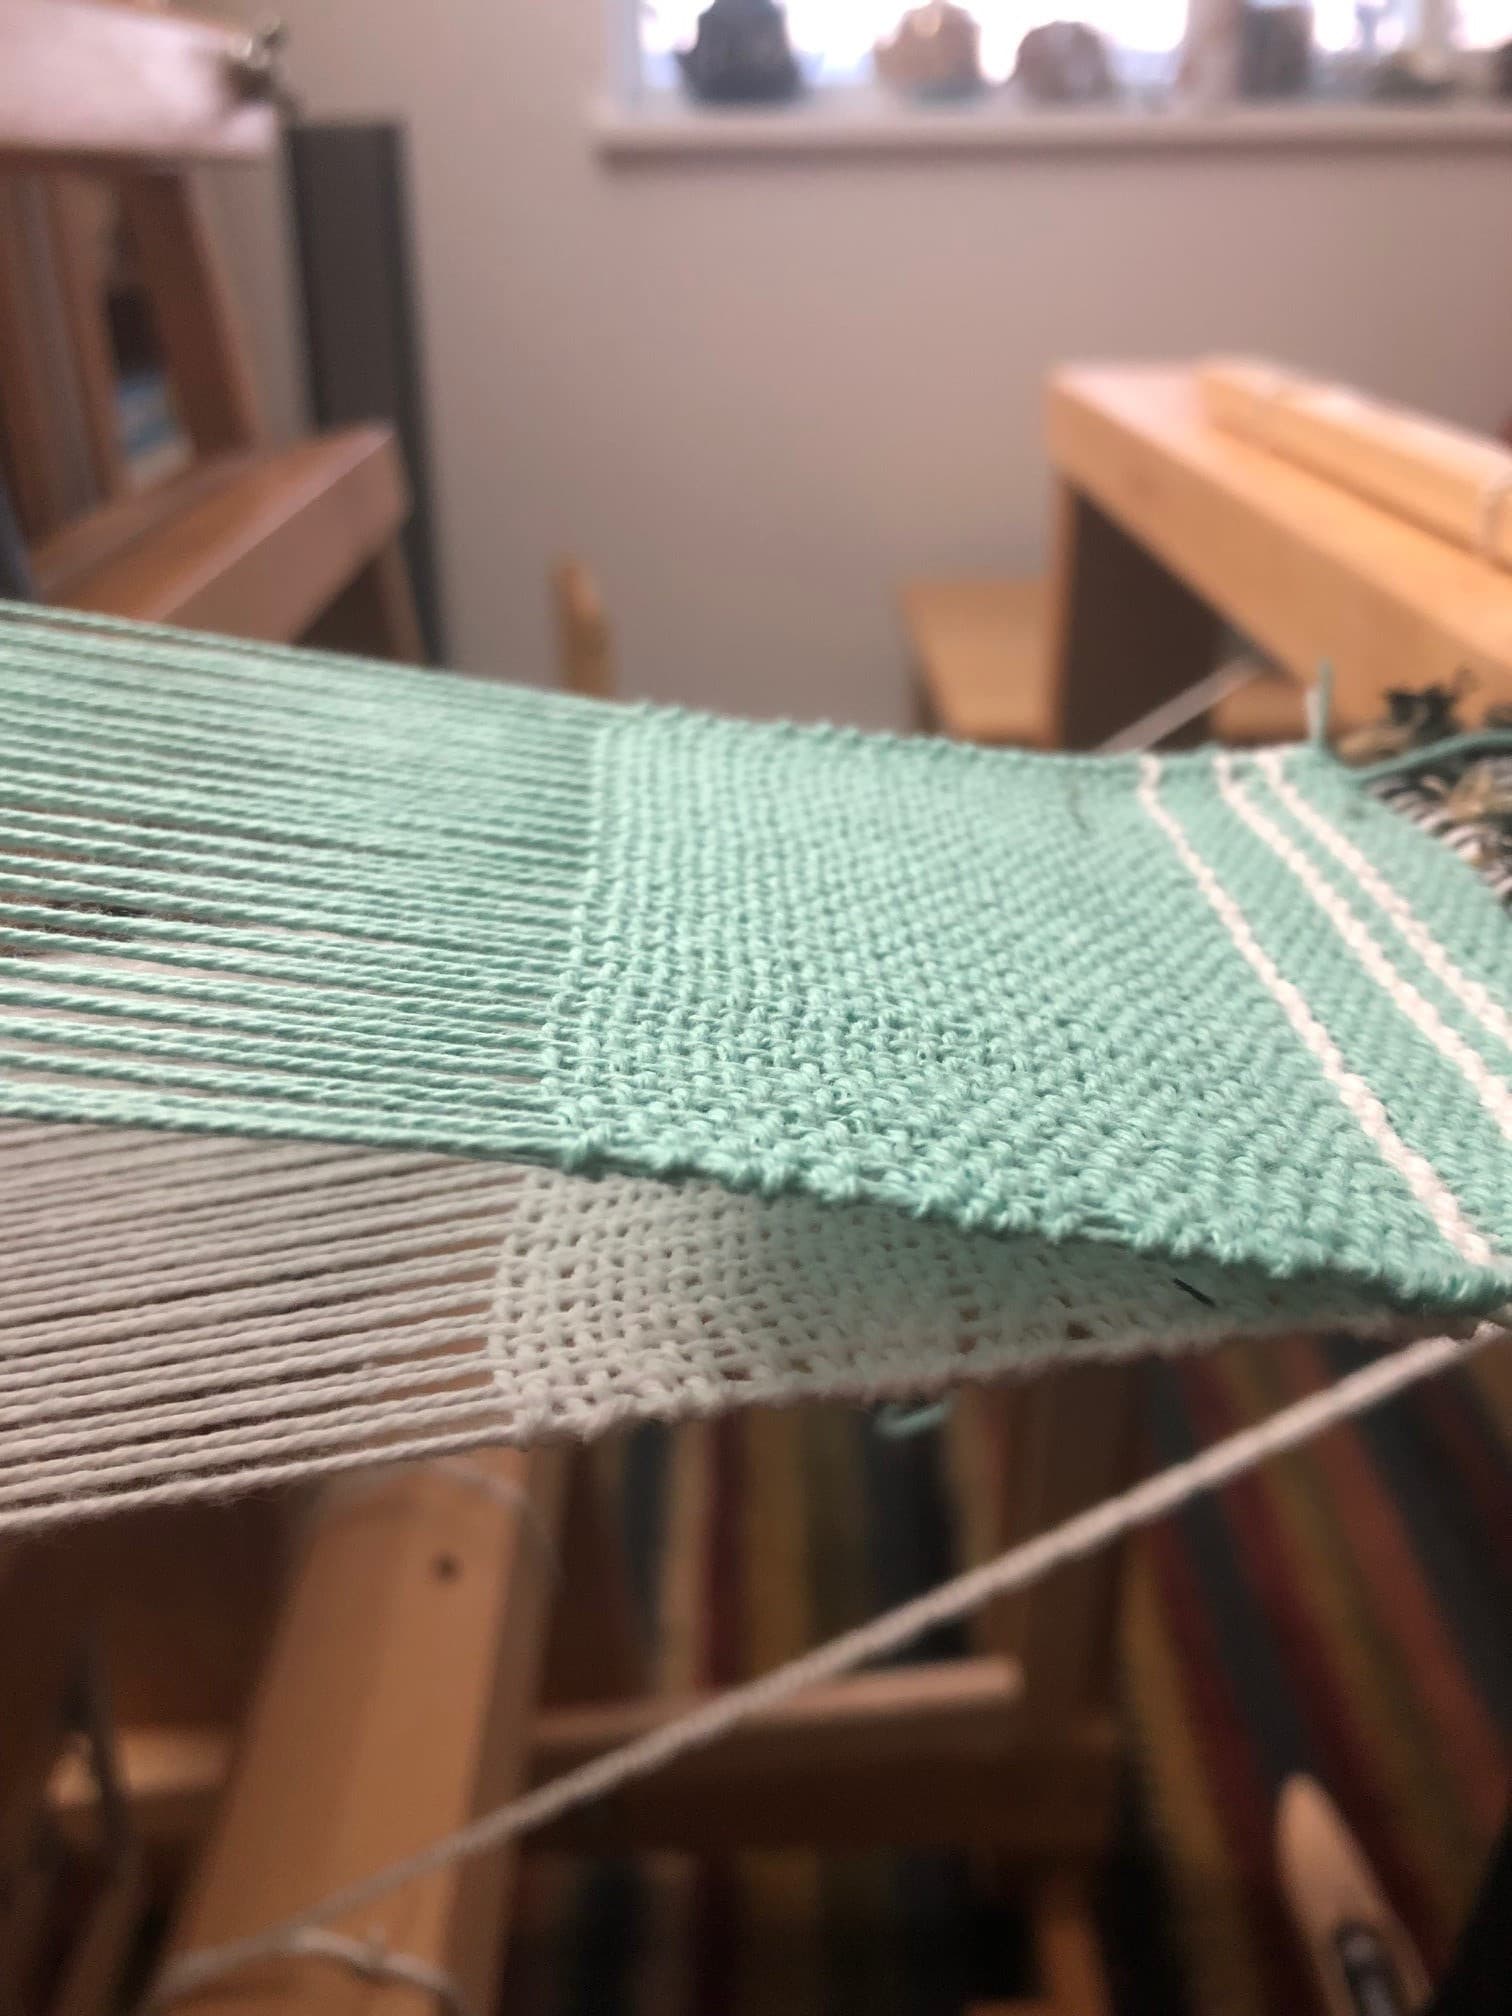 Getting Started With Double Weave